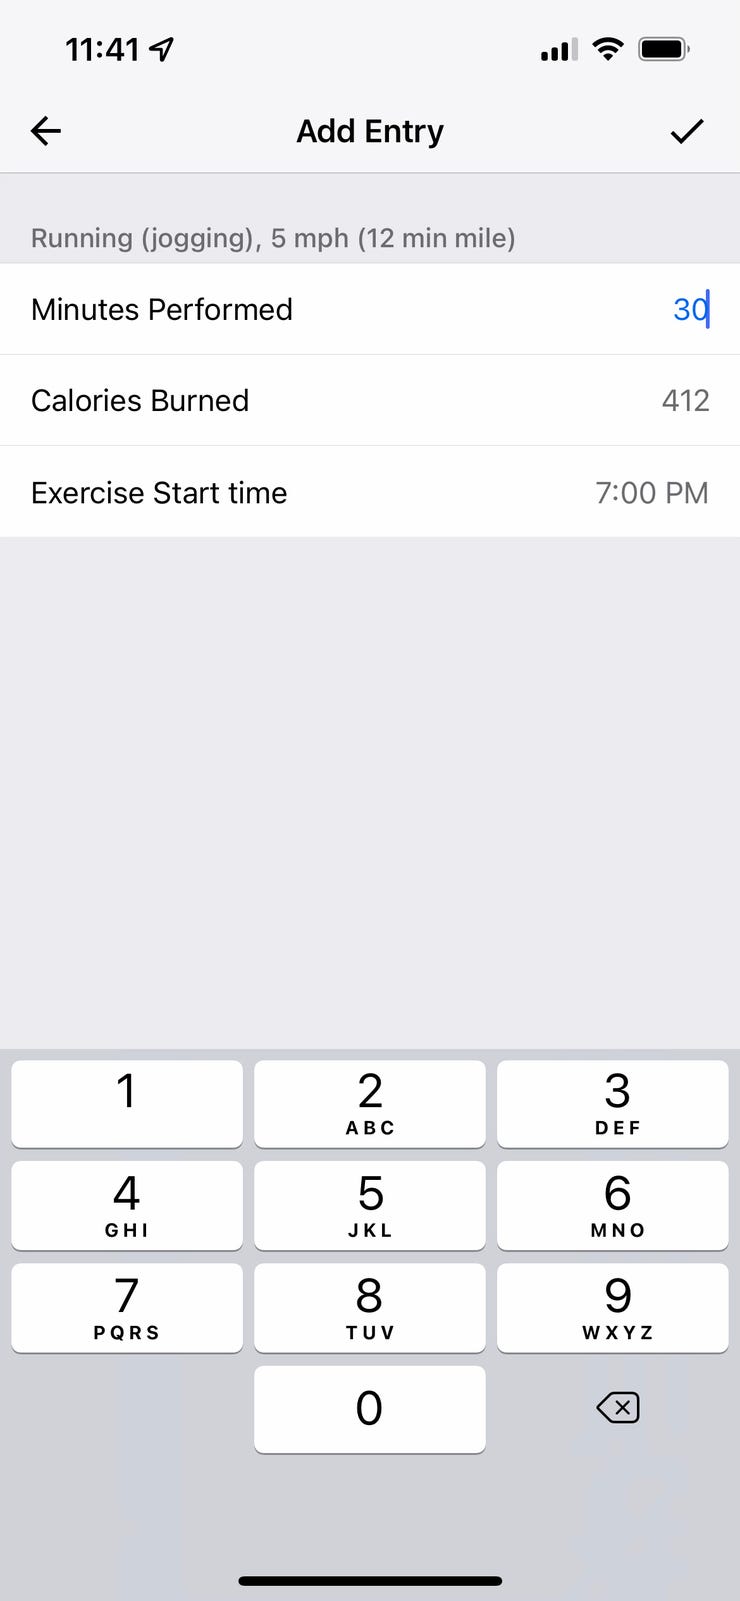 My Fitness Pal review: Can it help you lose weight? - Reviewed